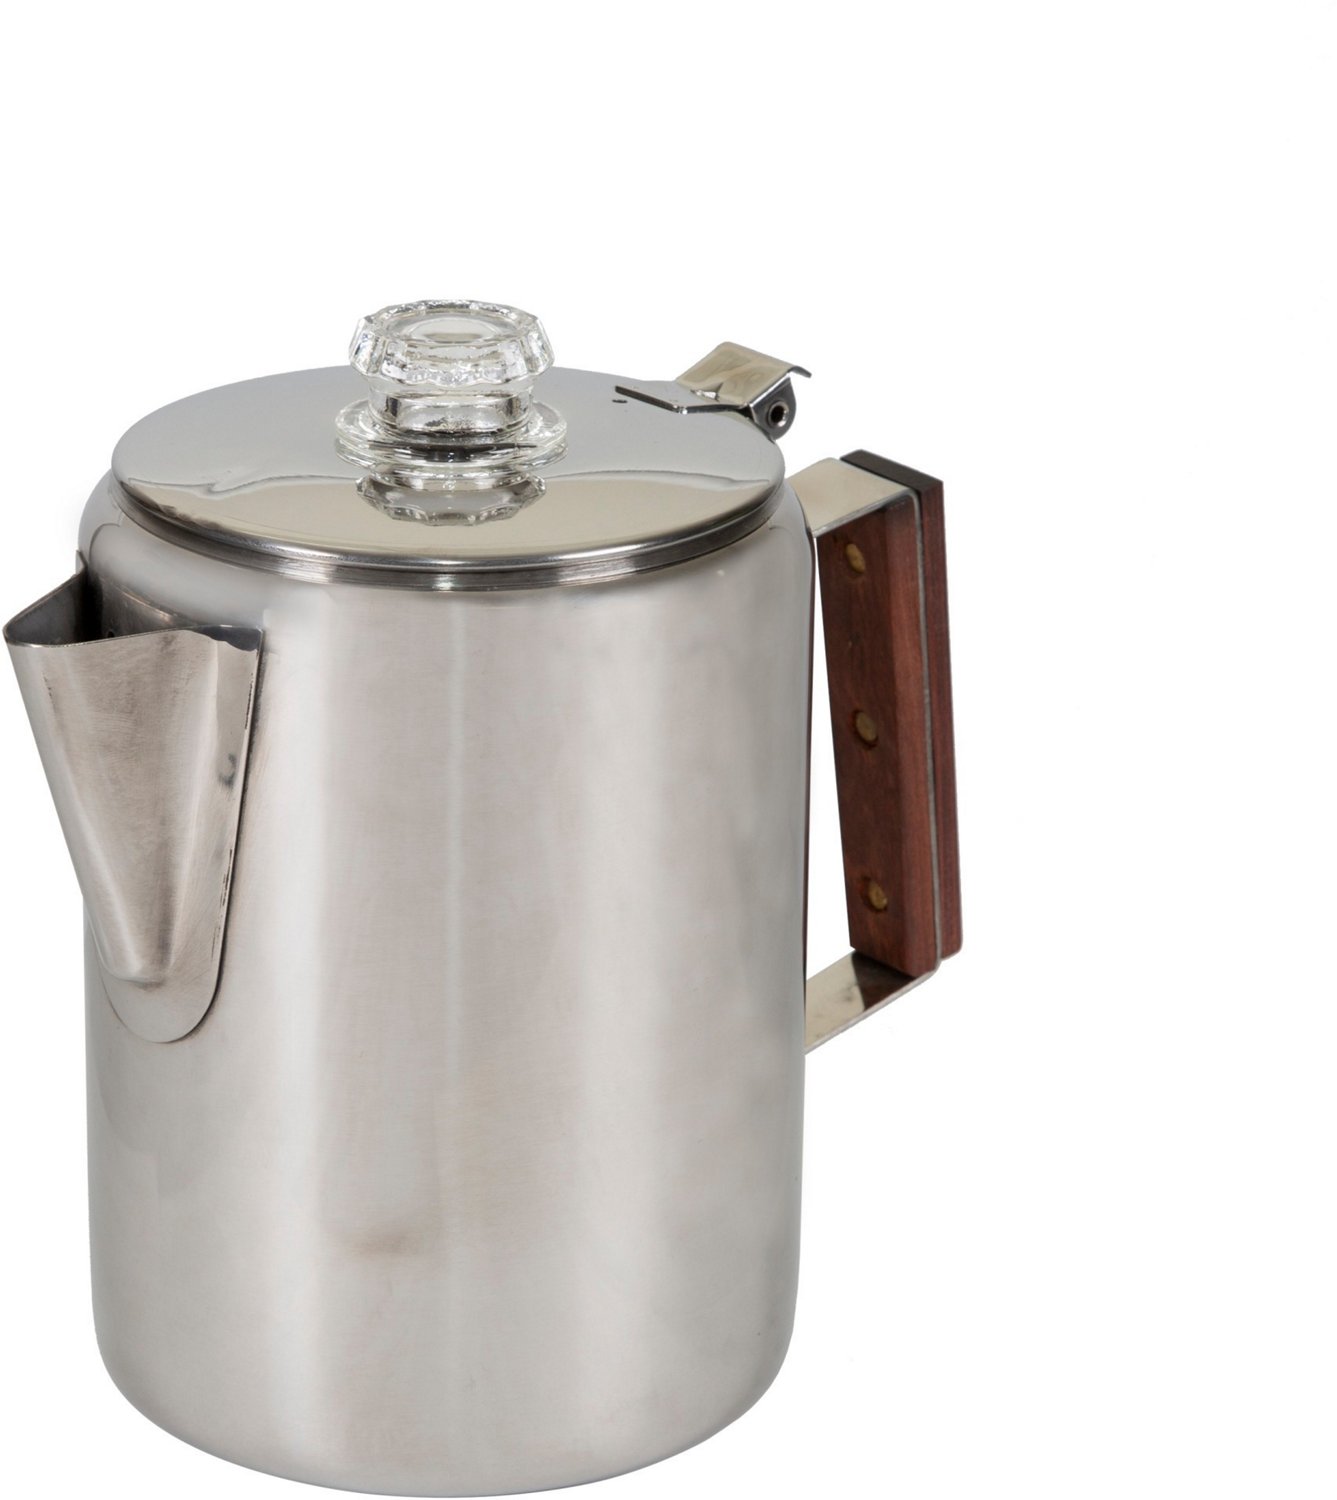 Stainless Camp Coffee Pot - sporting goods - by owner - sale - craigslist